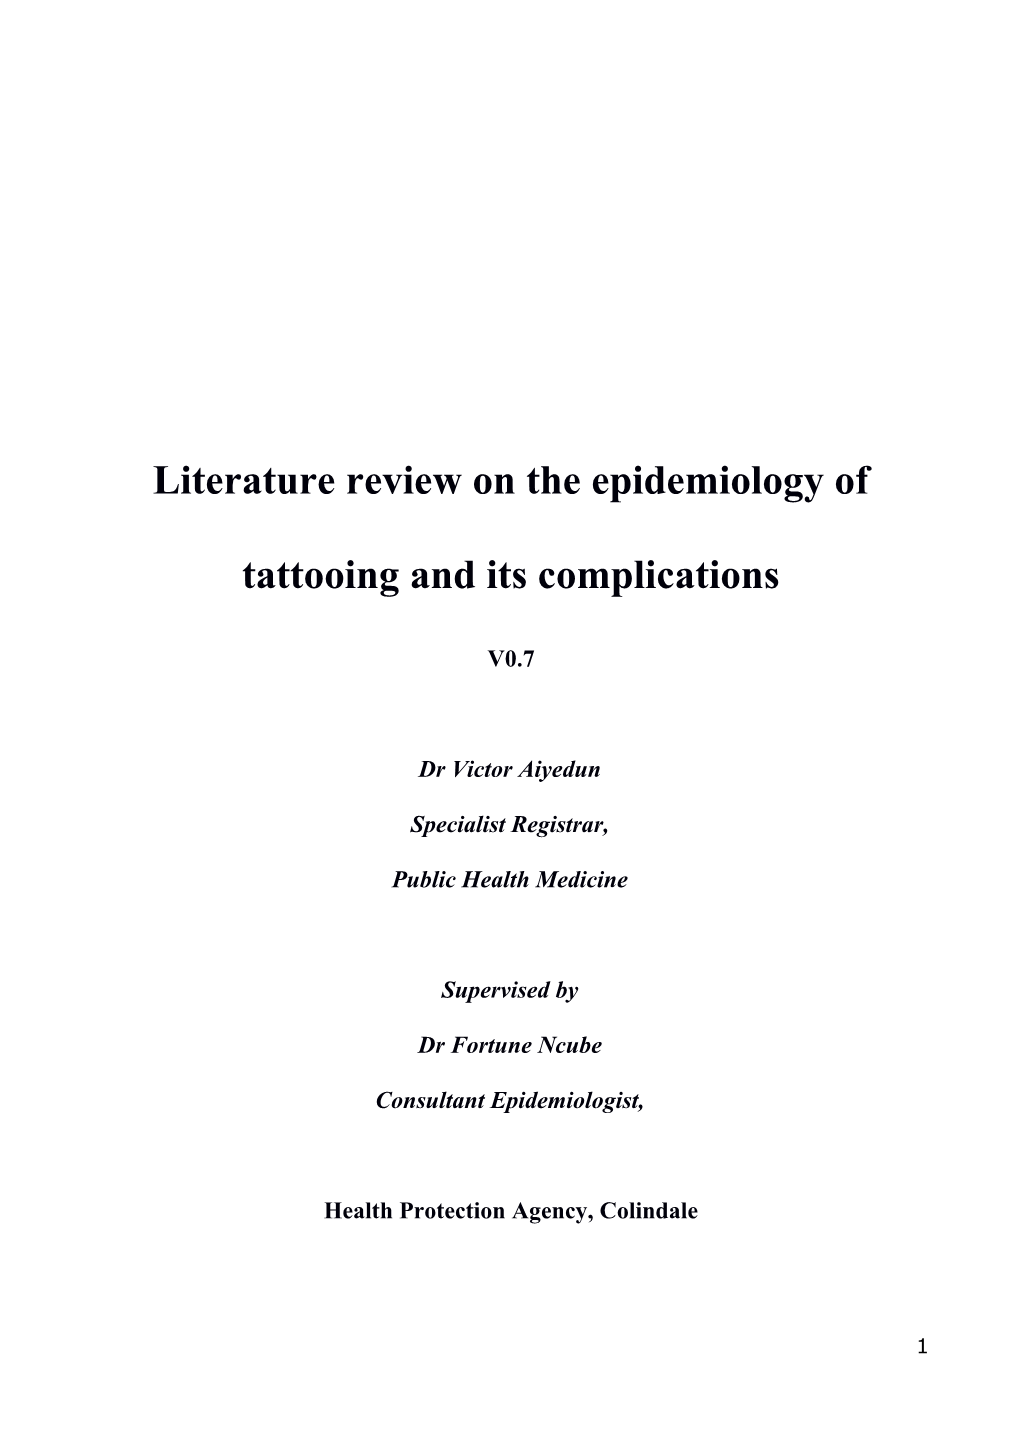 Literature Review on the Epidemiology of Tattooing and Its Complications